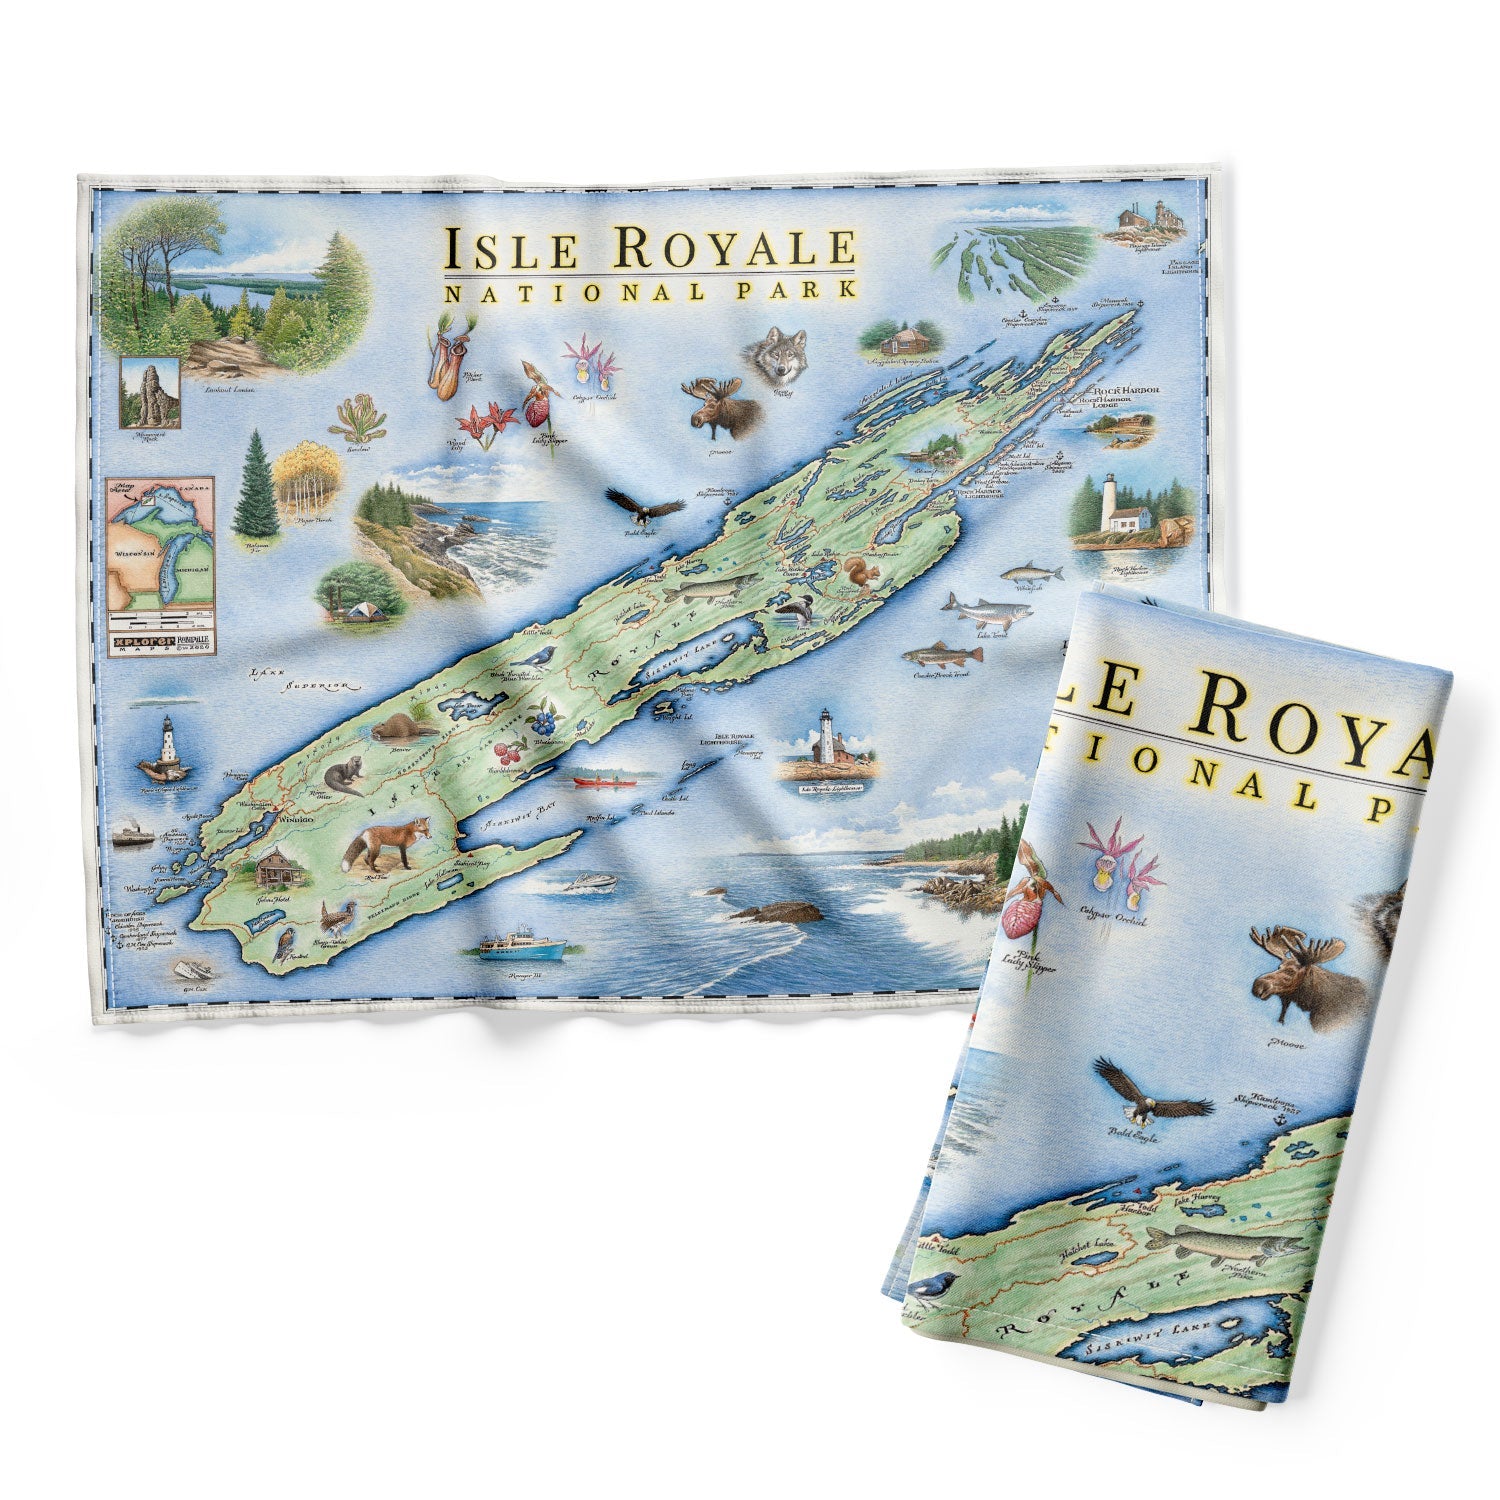 Isle Royale National Park Map Kitchen Dishwashing Towel in earth tones of blues and greens. The tea towel's map of Isle Royale shows an island in Lake Superior off the coasts of Minnesota and Michigan featuring wolves, moose, Pink Lady Slippers, and Thimbleberries. Other illustrations include Lookout Louise, Rock of Ages Lighthouse, and the Rocky Harbor Lodge.